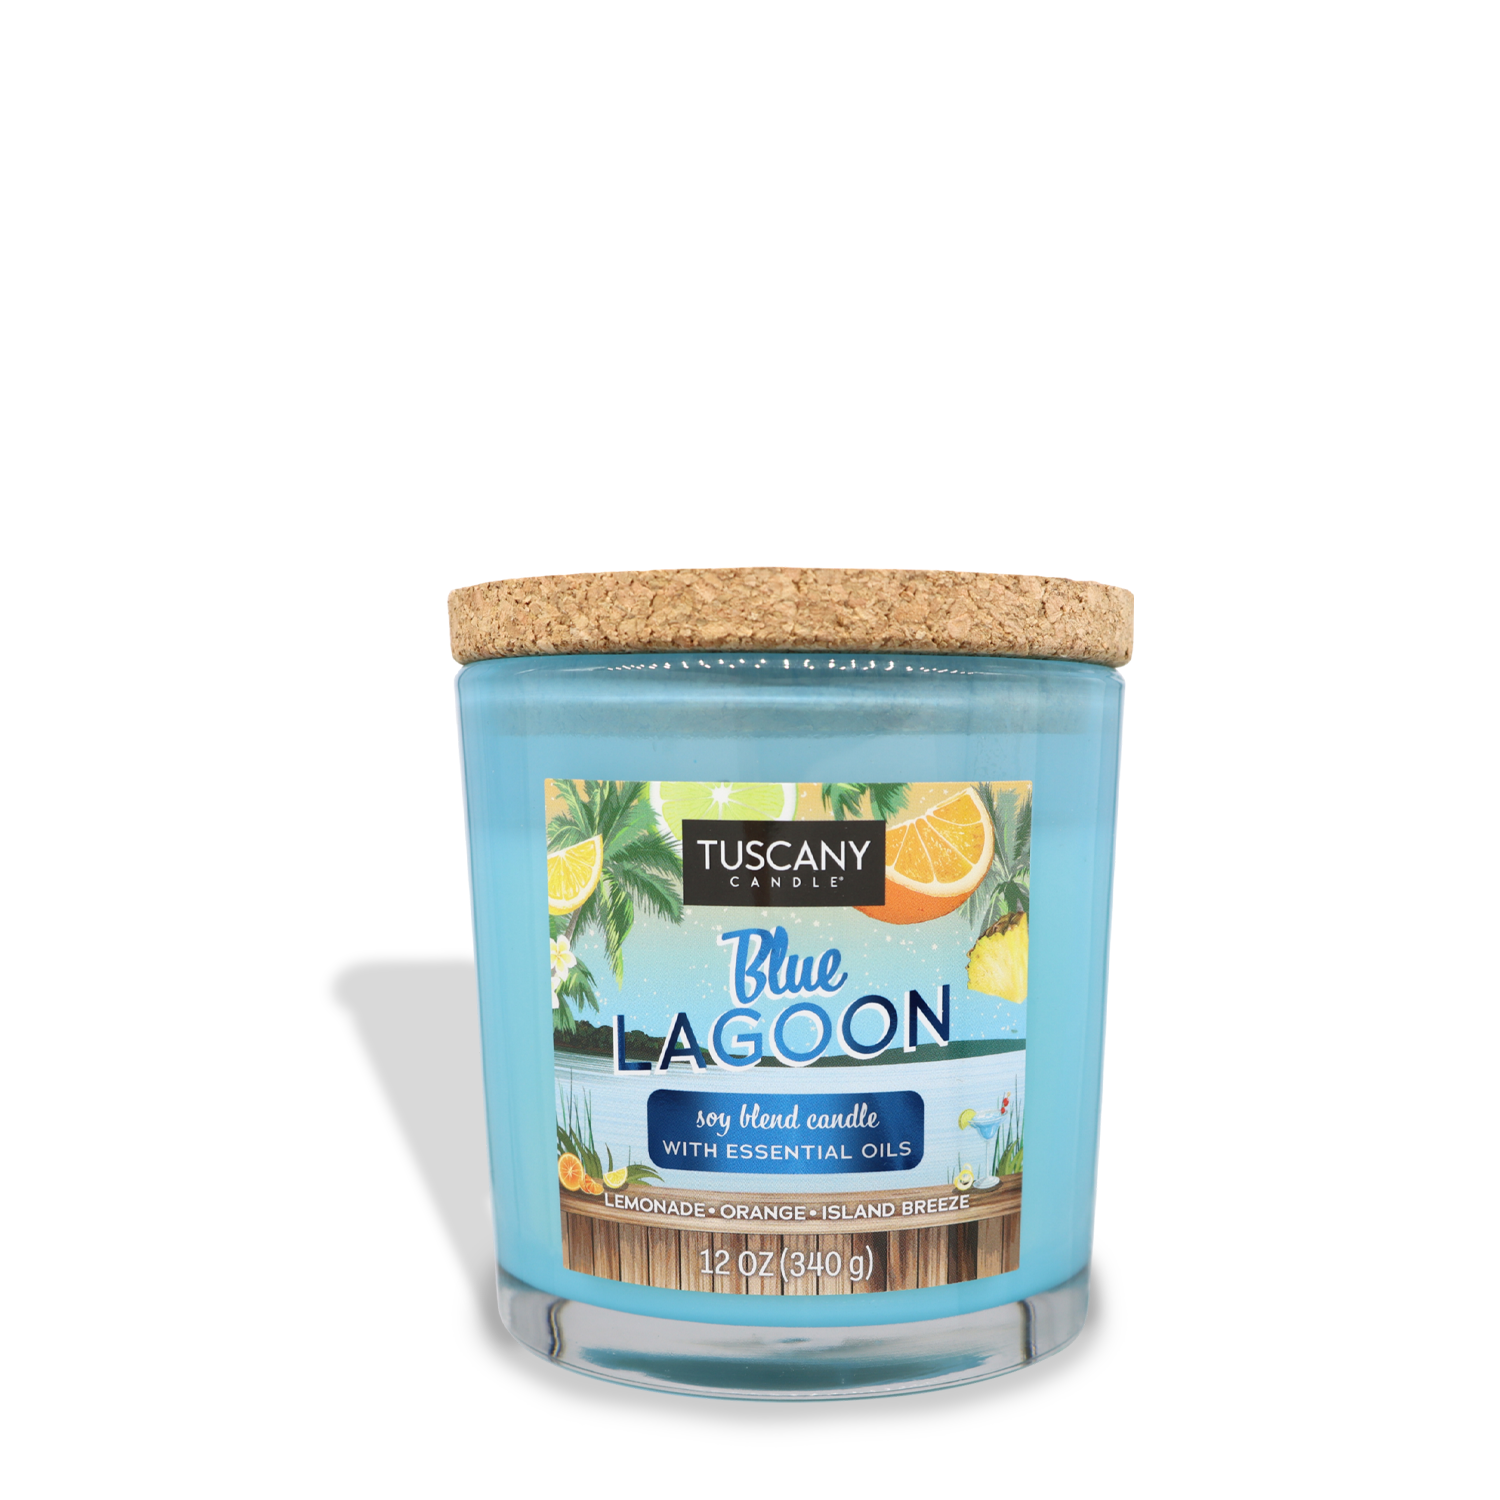 A Tuscany Candle® SEASONAL Blue Lagoon (12 oz) – Sunset Beach Bar Collection soy blend candle with a cork lid. The label features images of palm leaves, sparkling orange slices, and a coastal scene. The candle weighs 12 oz (340 g).